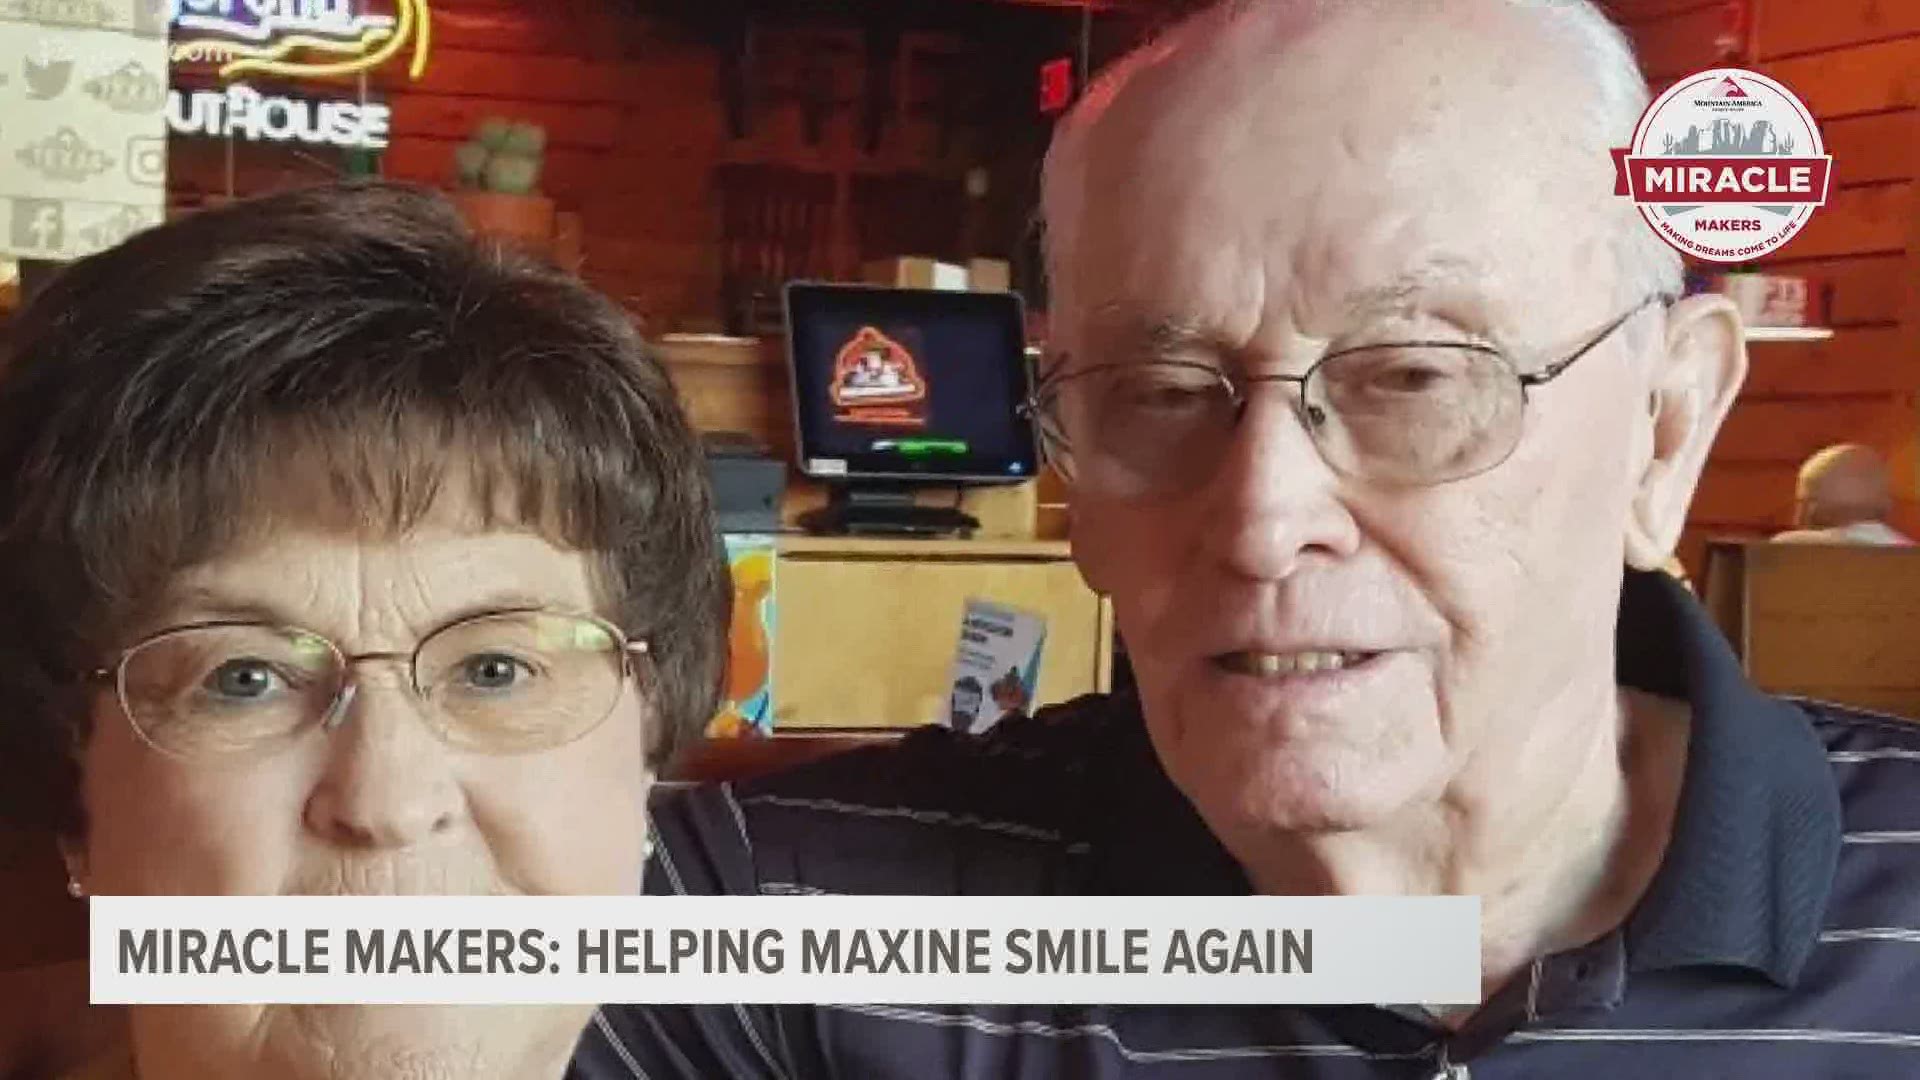 Maxine Hooker’s apartment flooded in January and she lost her husband in May. Mountain America Credit Union heard about Maxine’s story and decided to help.